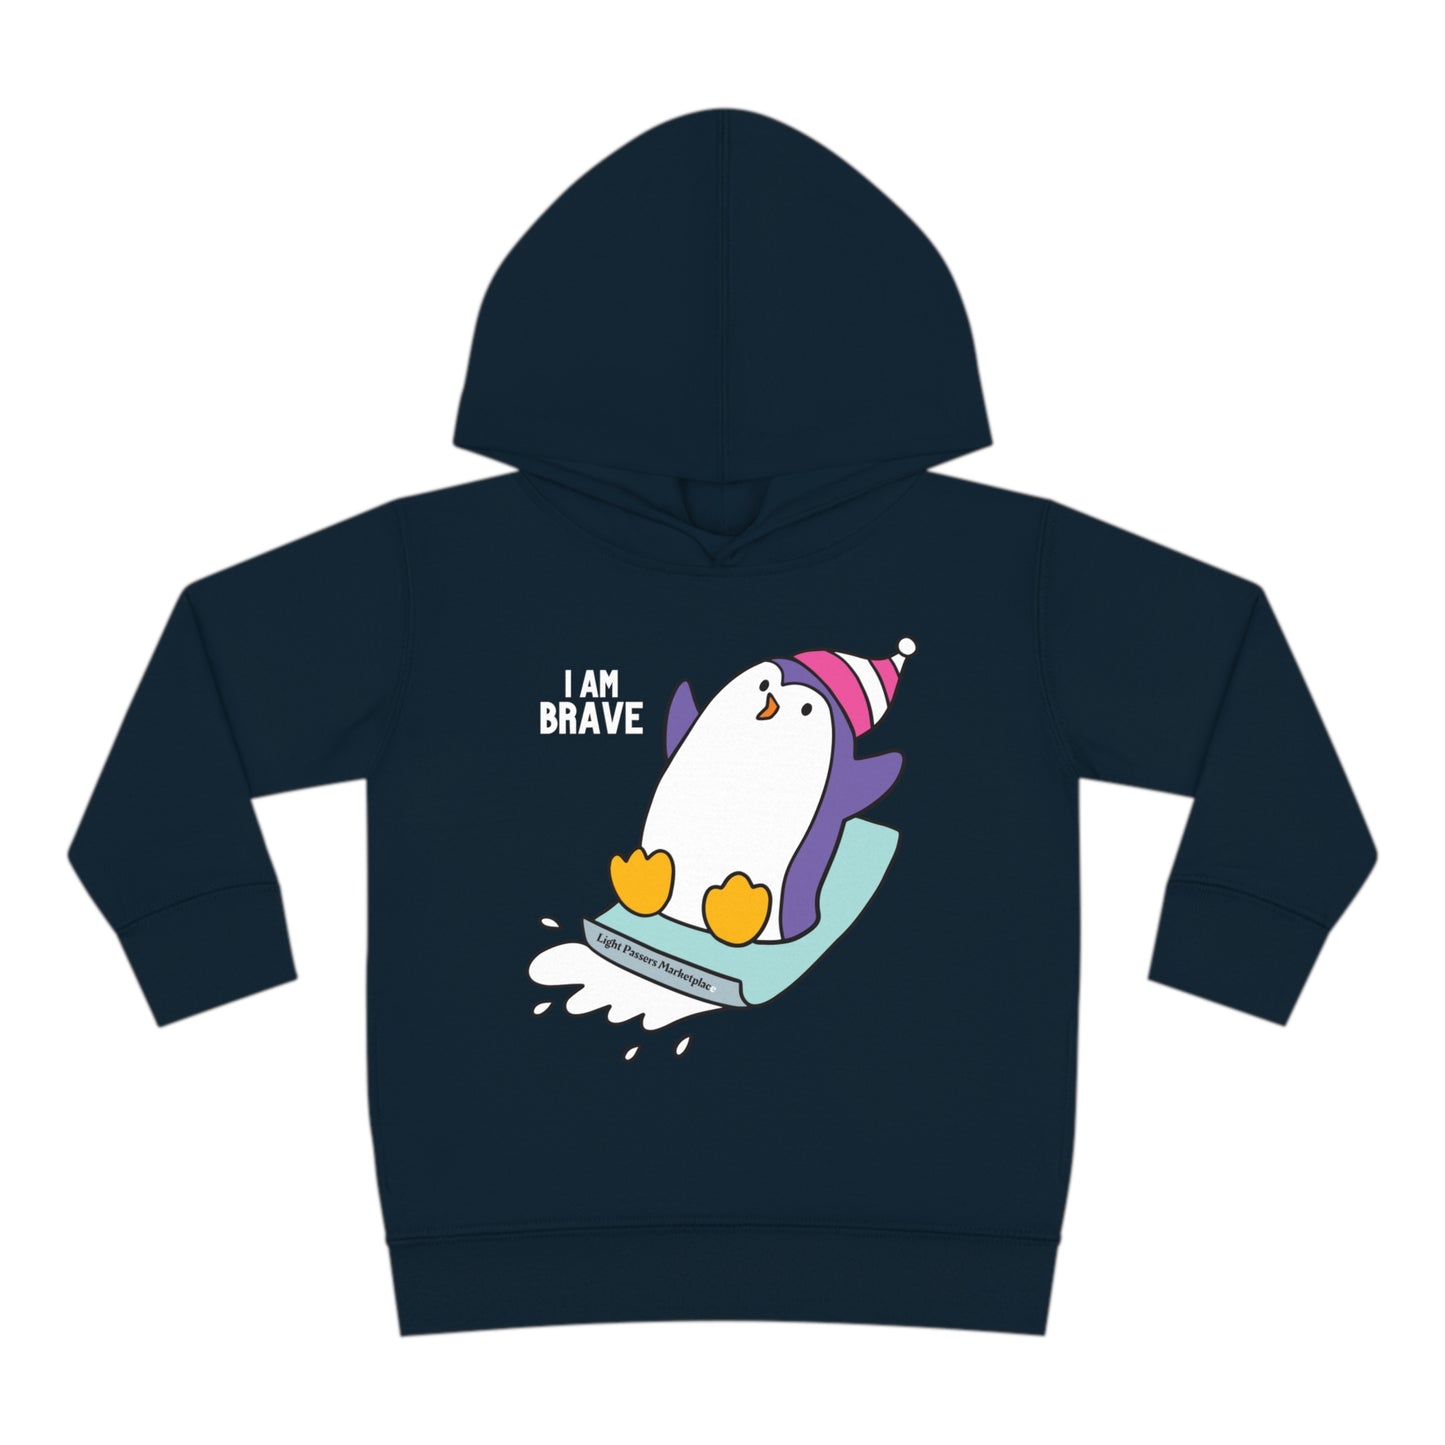 Toddler hoodie featuring a brave penguin design, jersey-lined hood, cover-stitched details, side seam pockets, and durable construction for lasting coziness.